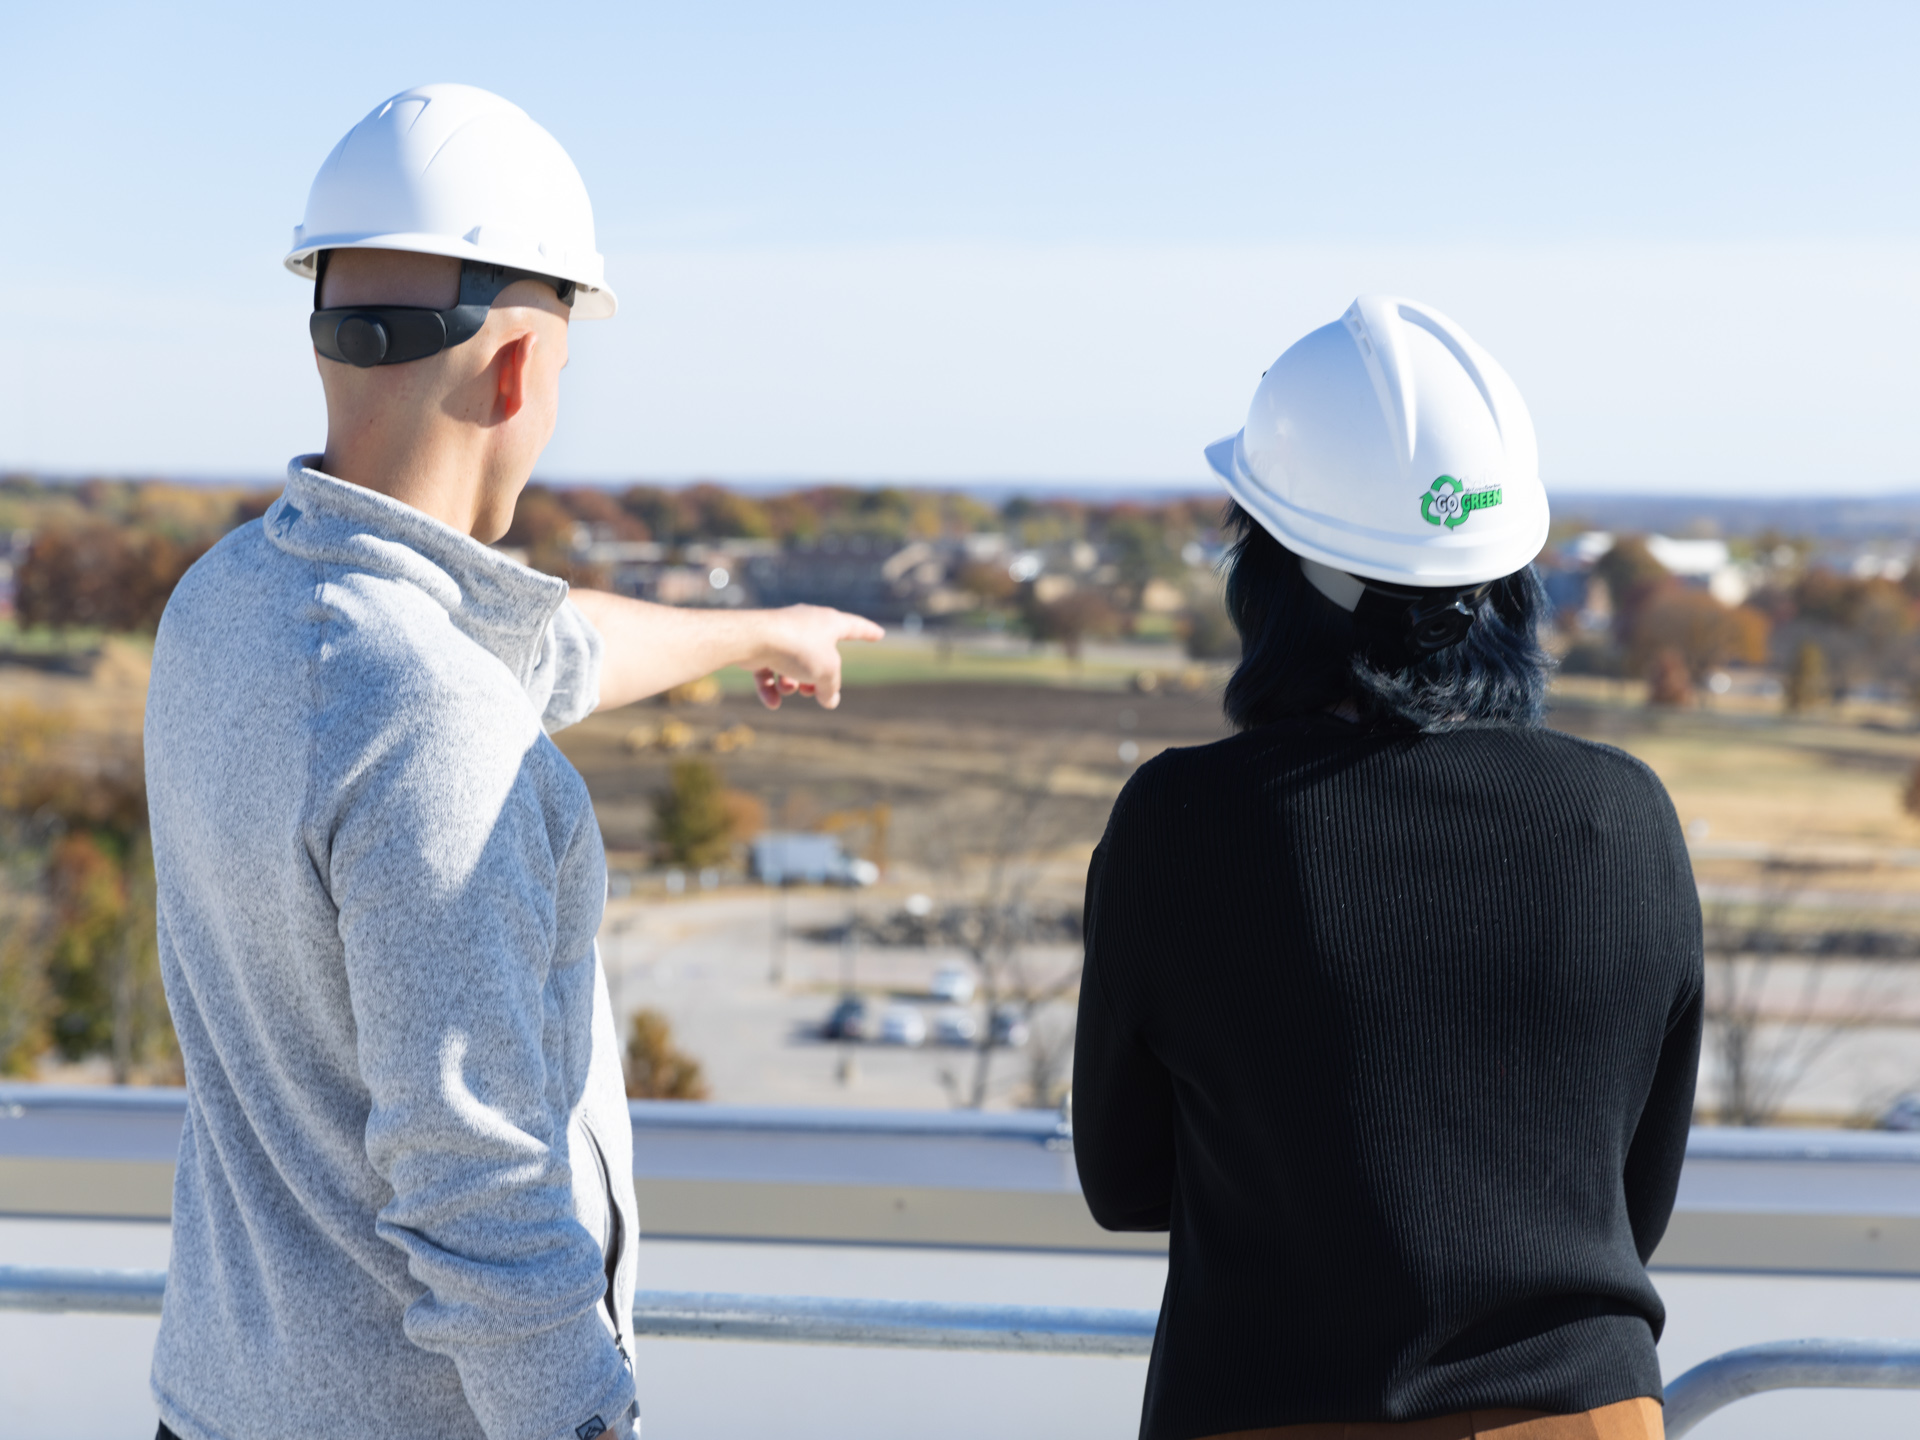 Two people in hardhats stand on a roof and point to land below while furthering the economic development of Lawrence.